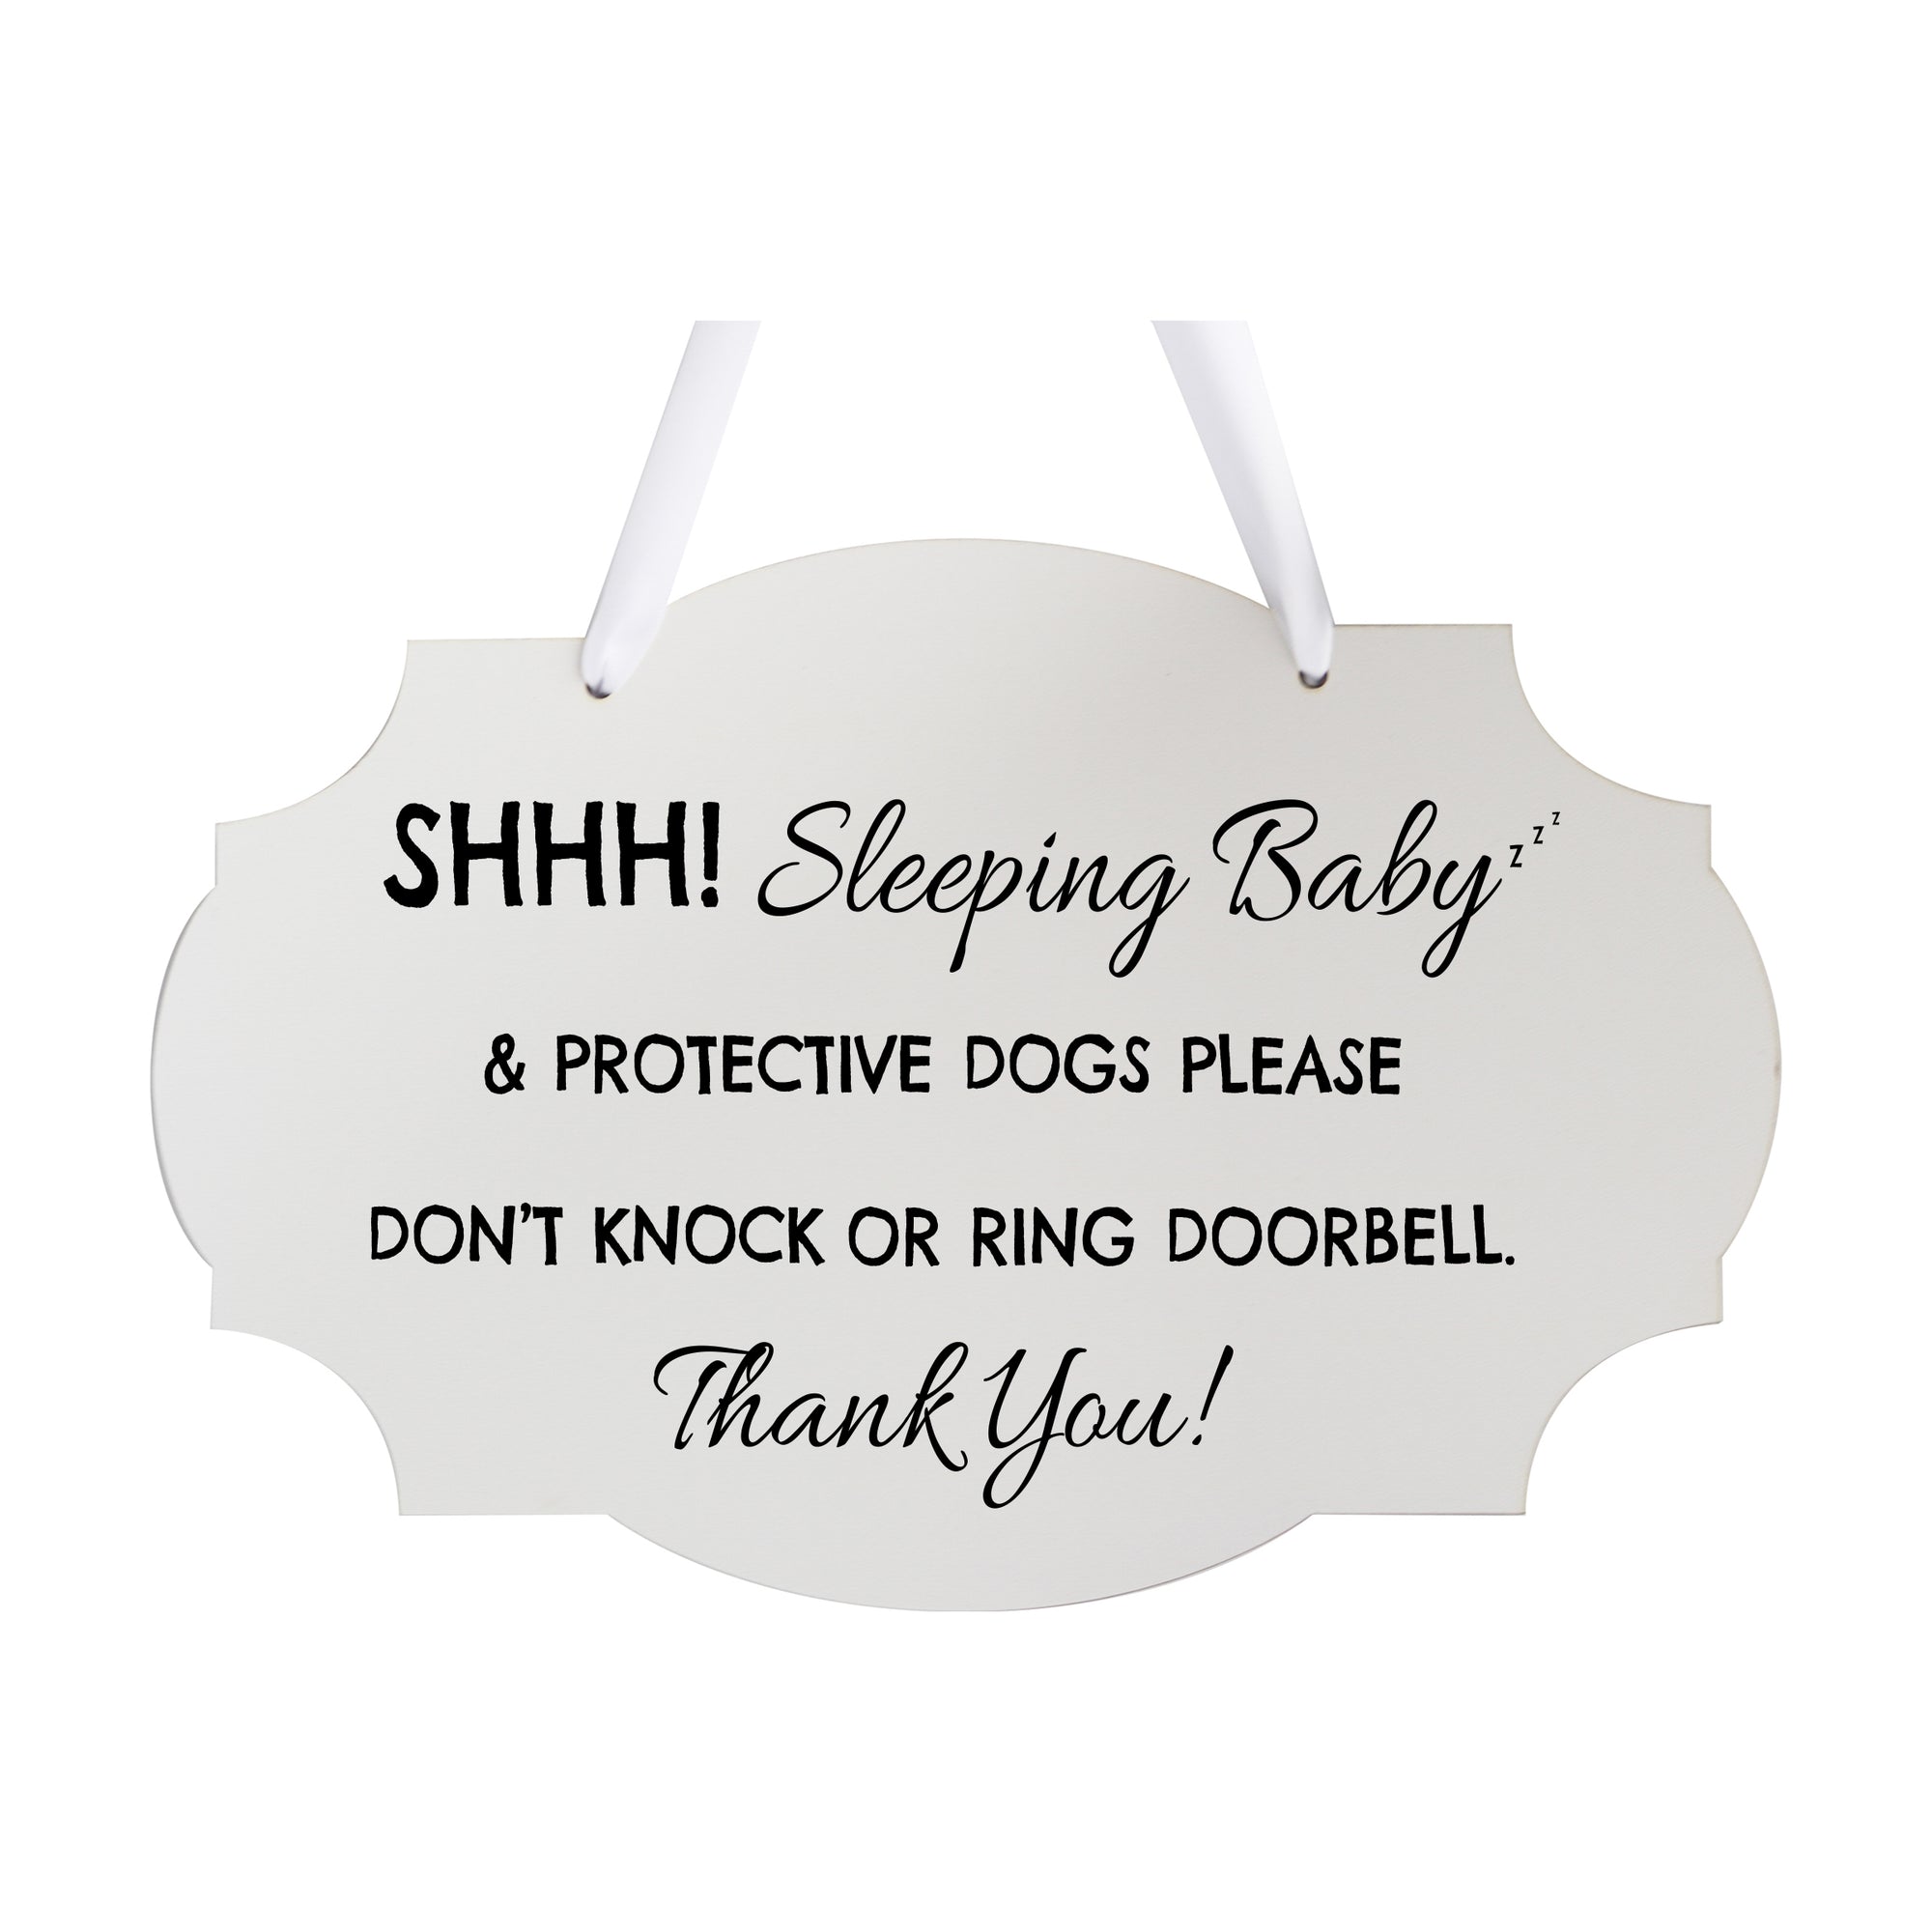 LifeSong Milestones Sleeping Baby Protective Puppies Rope Hanging Sign for Front Door - Do Not Knock or Ring Doorbell - Quiet Entry for House New Home Decor - 8x12